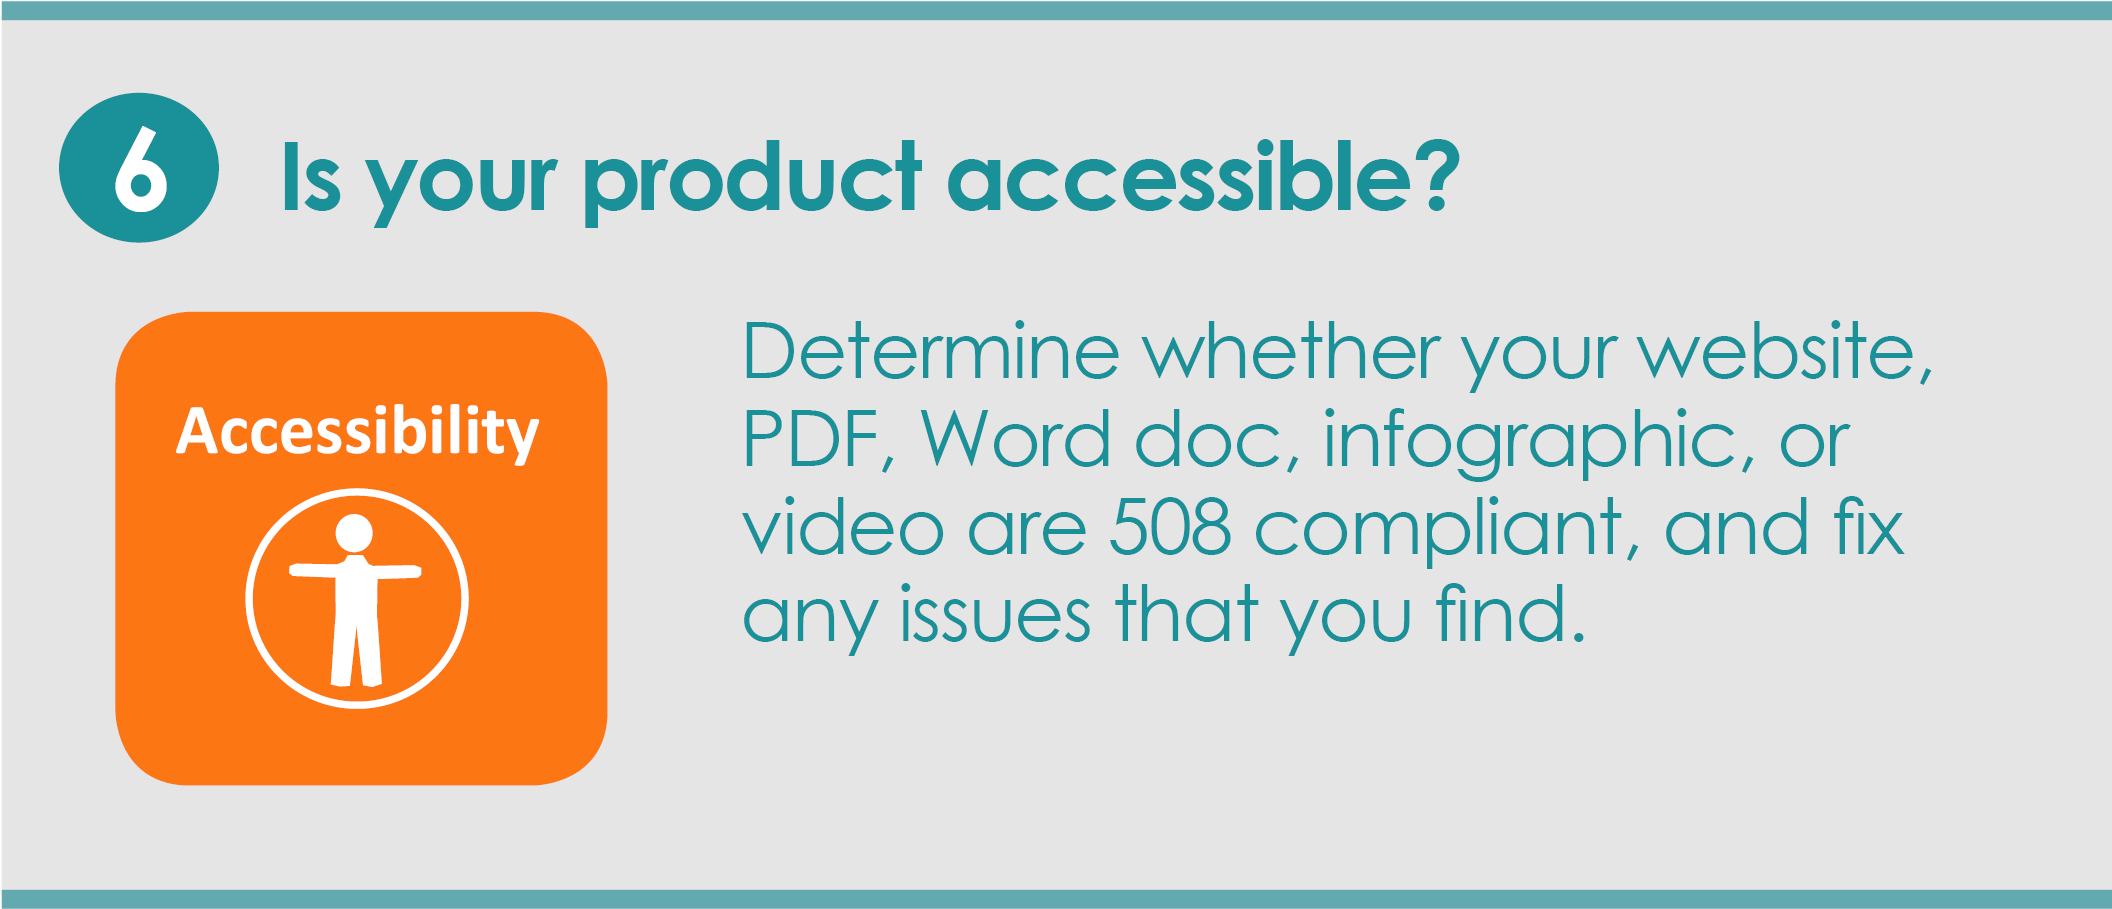 Step 6: Is your product accessible? Determine whether your website, PDF, Word doc, infographic, or video are 508 compliant, and fix any issues that you find.